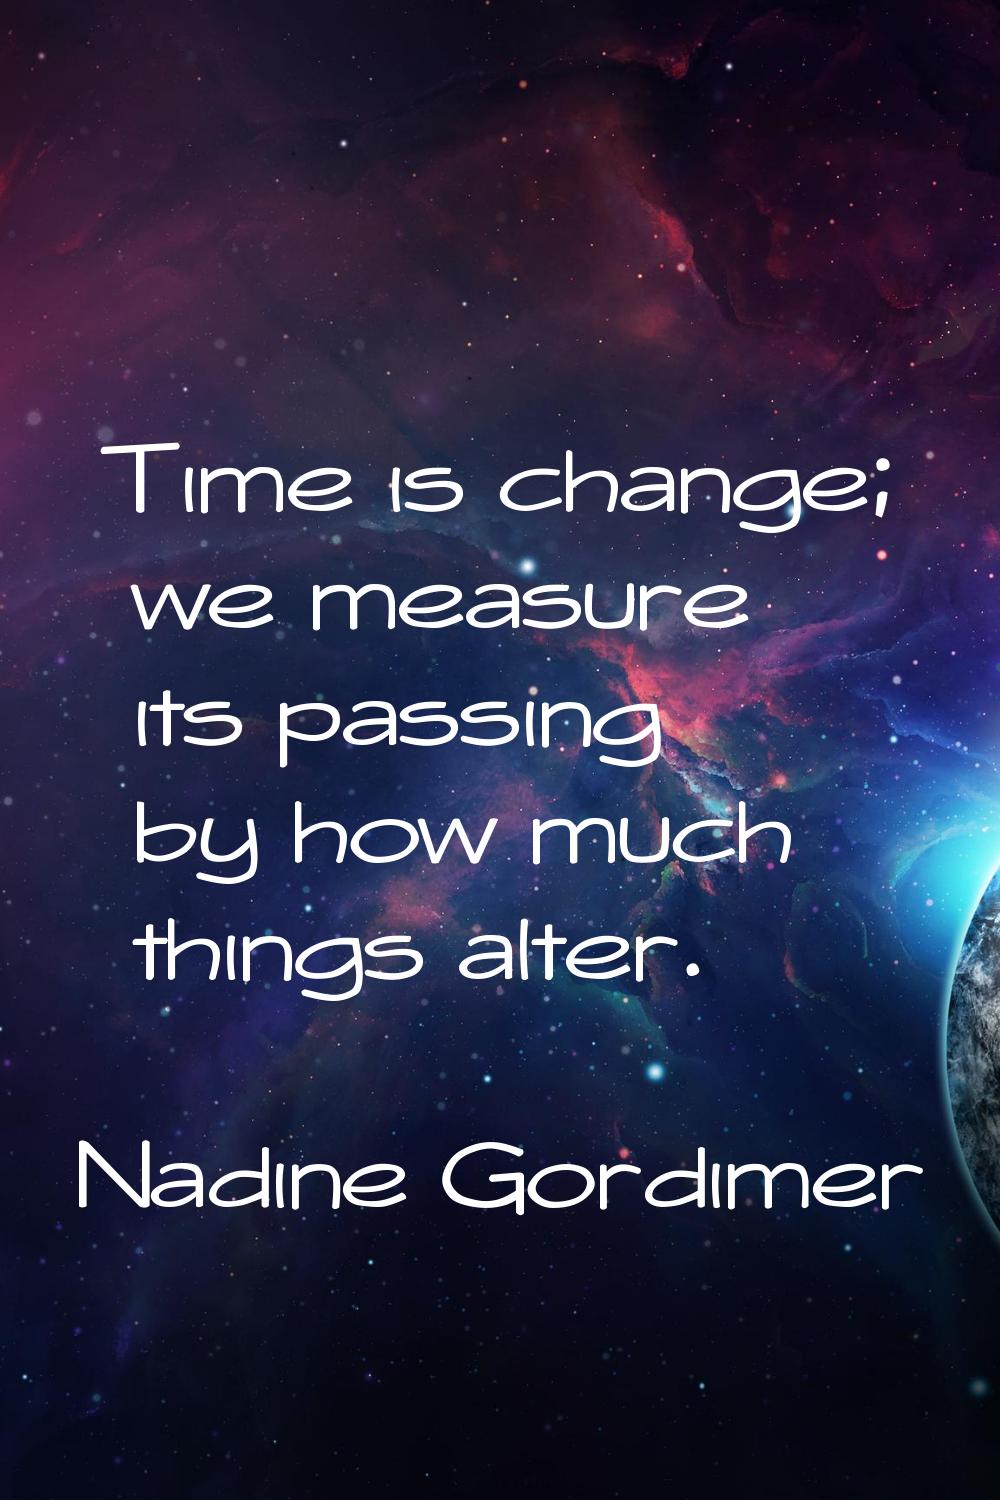 Time is change; we measure its passing by how much things alter.